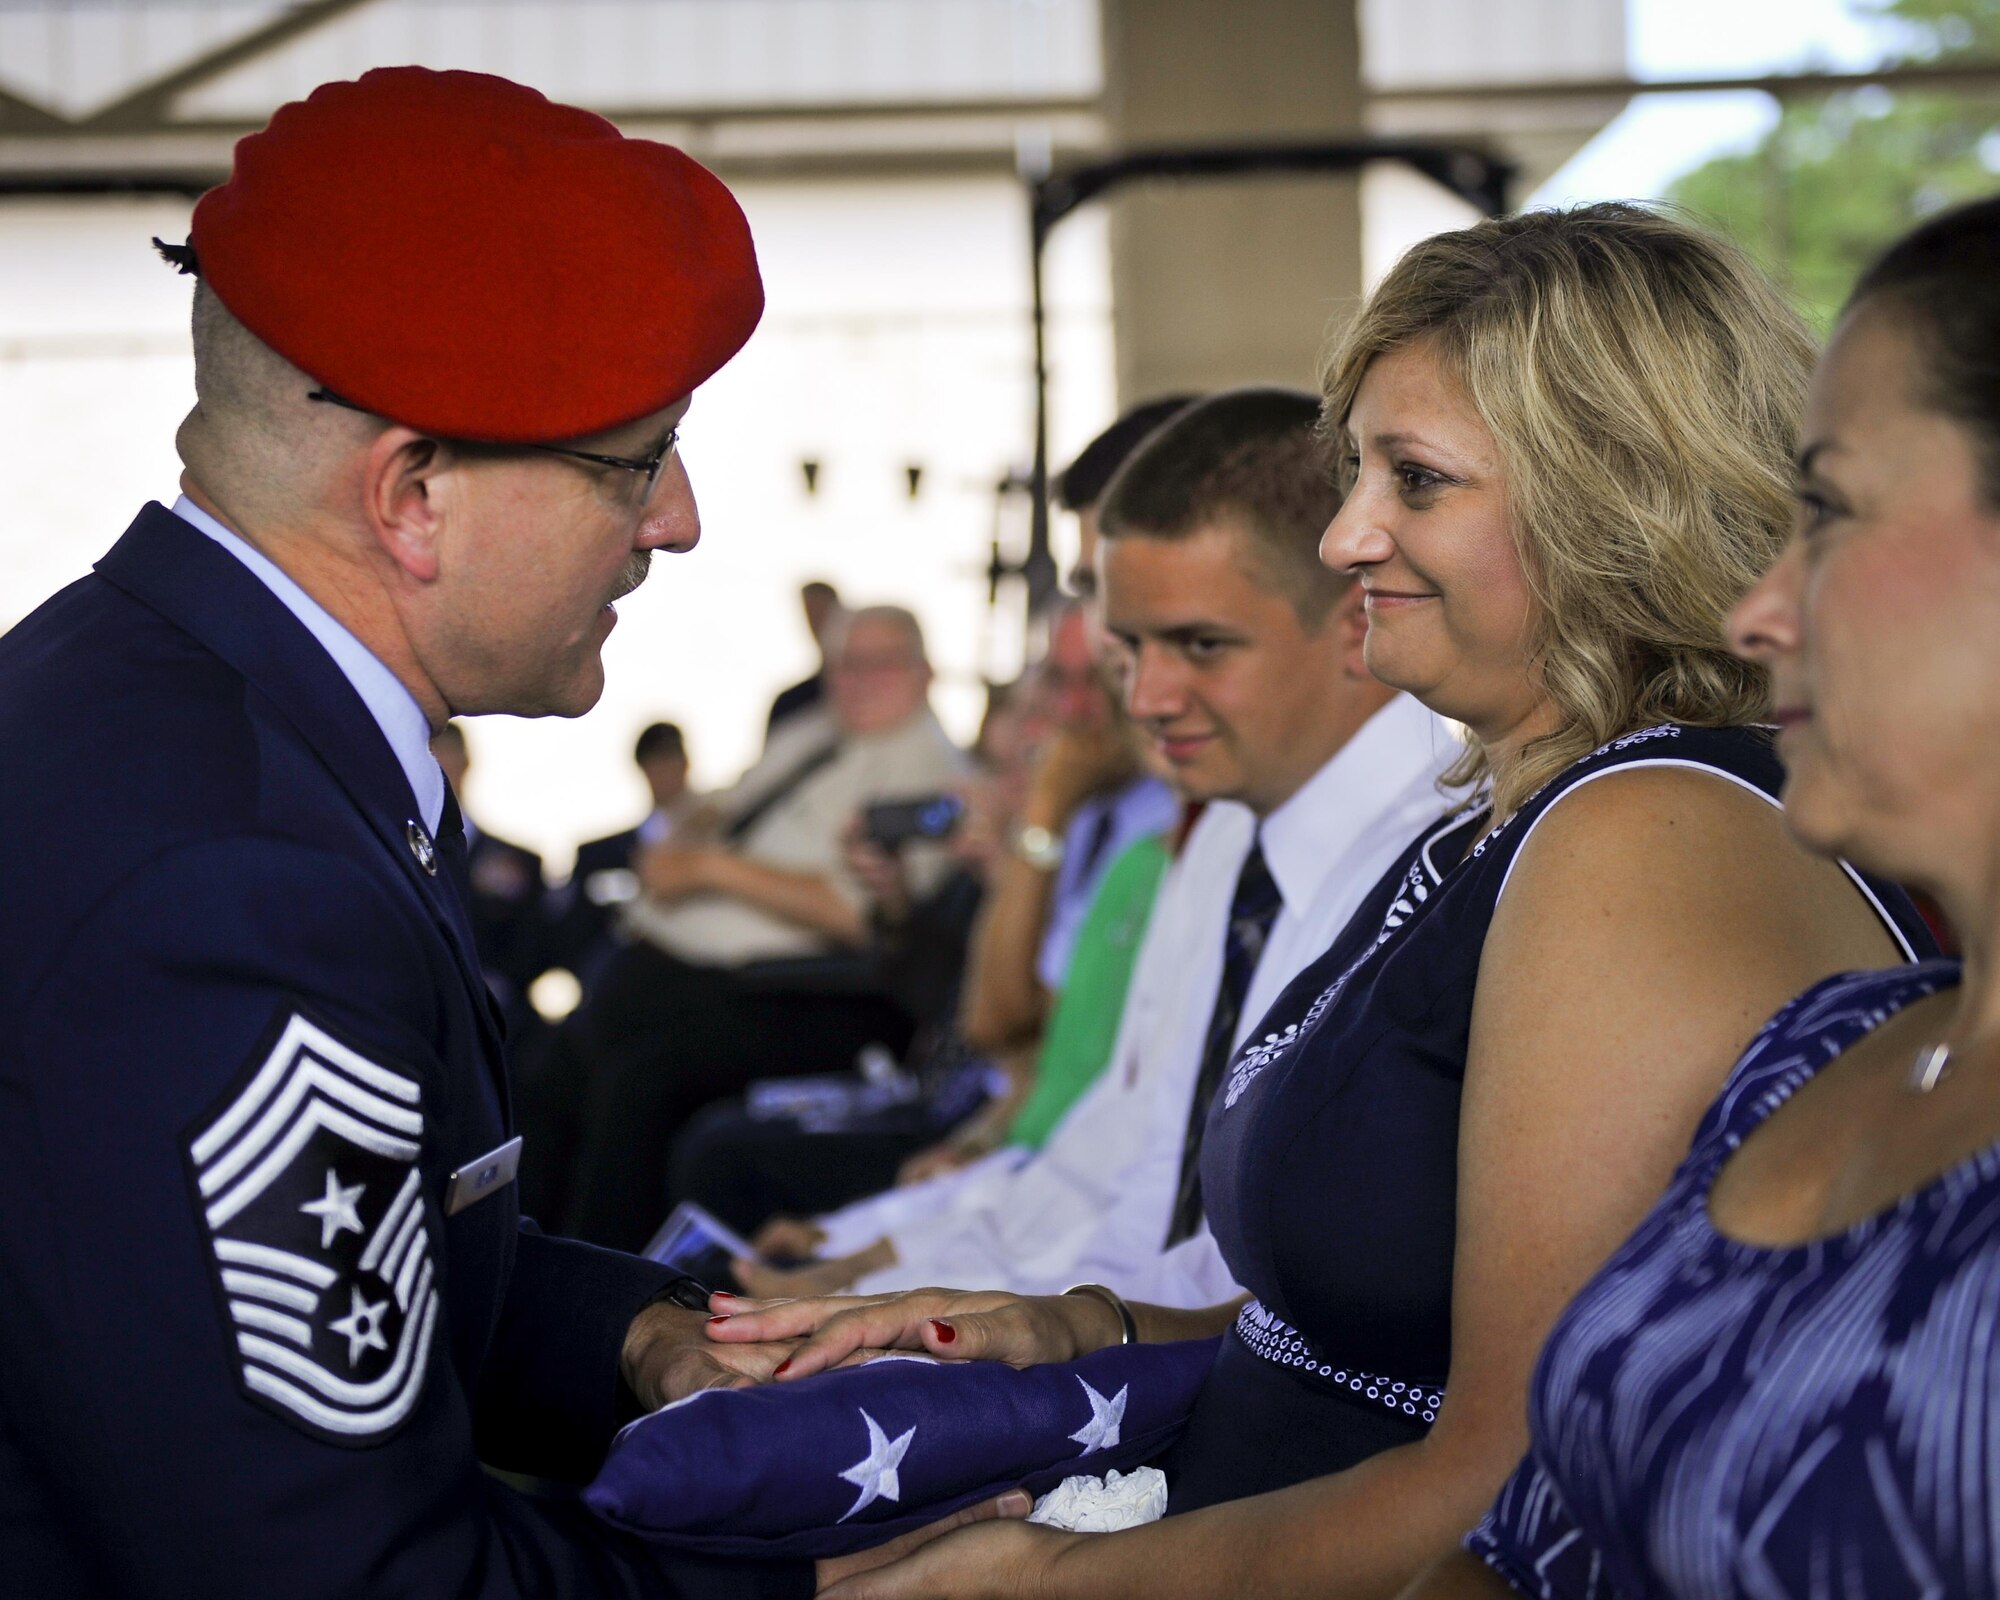 Chief Master Sgt. Bruce W. Dixon, the command chief master sergeant of the 24th Special Operations Wing, presents his wife, Lori Dixon, with an American flag at Hurlburt Field, Fla. May 13, 2016. Dixon served 30 years as a combat controller earning the title of master parachutist with more than 400 military jumps including three combat jumps in Afghanistan. In total, he spent ten of those thirty years away from his family, consistently serving his nation's call in dangerous ground combat and training. (U.S. Air Force photo by Airman 1st Class Kai White) 